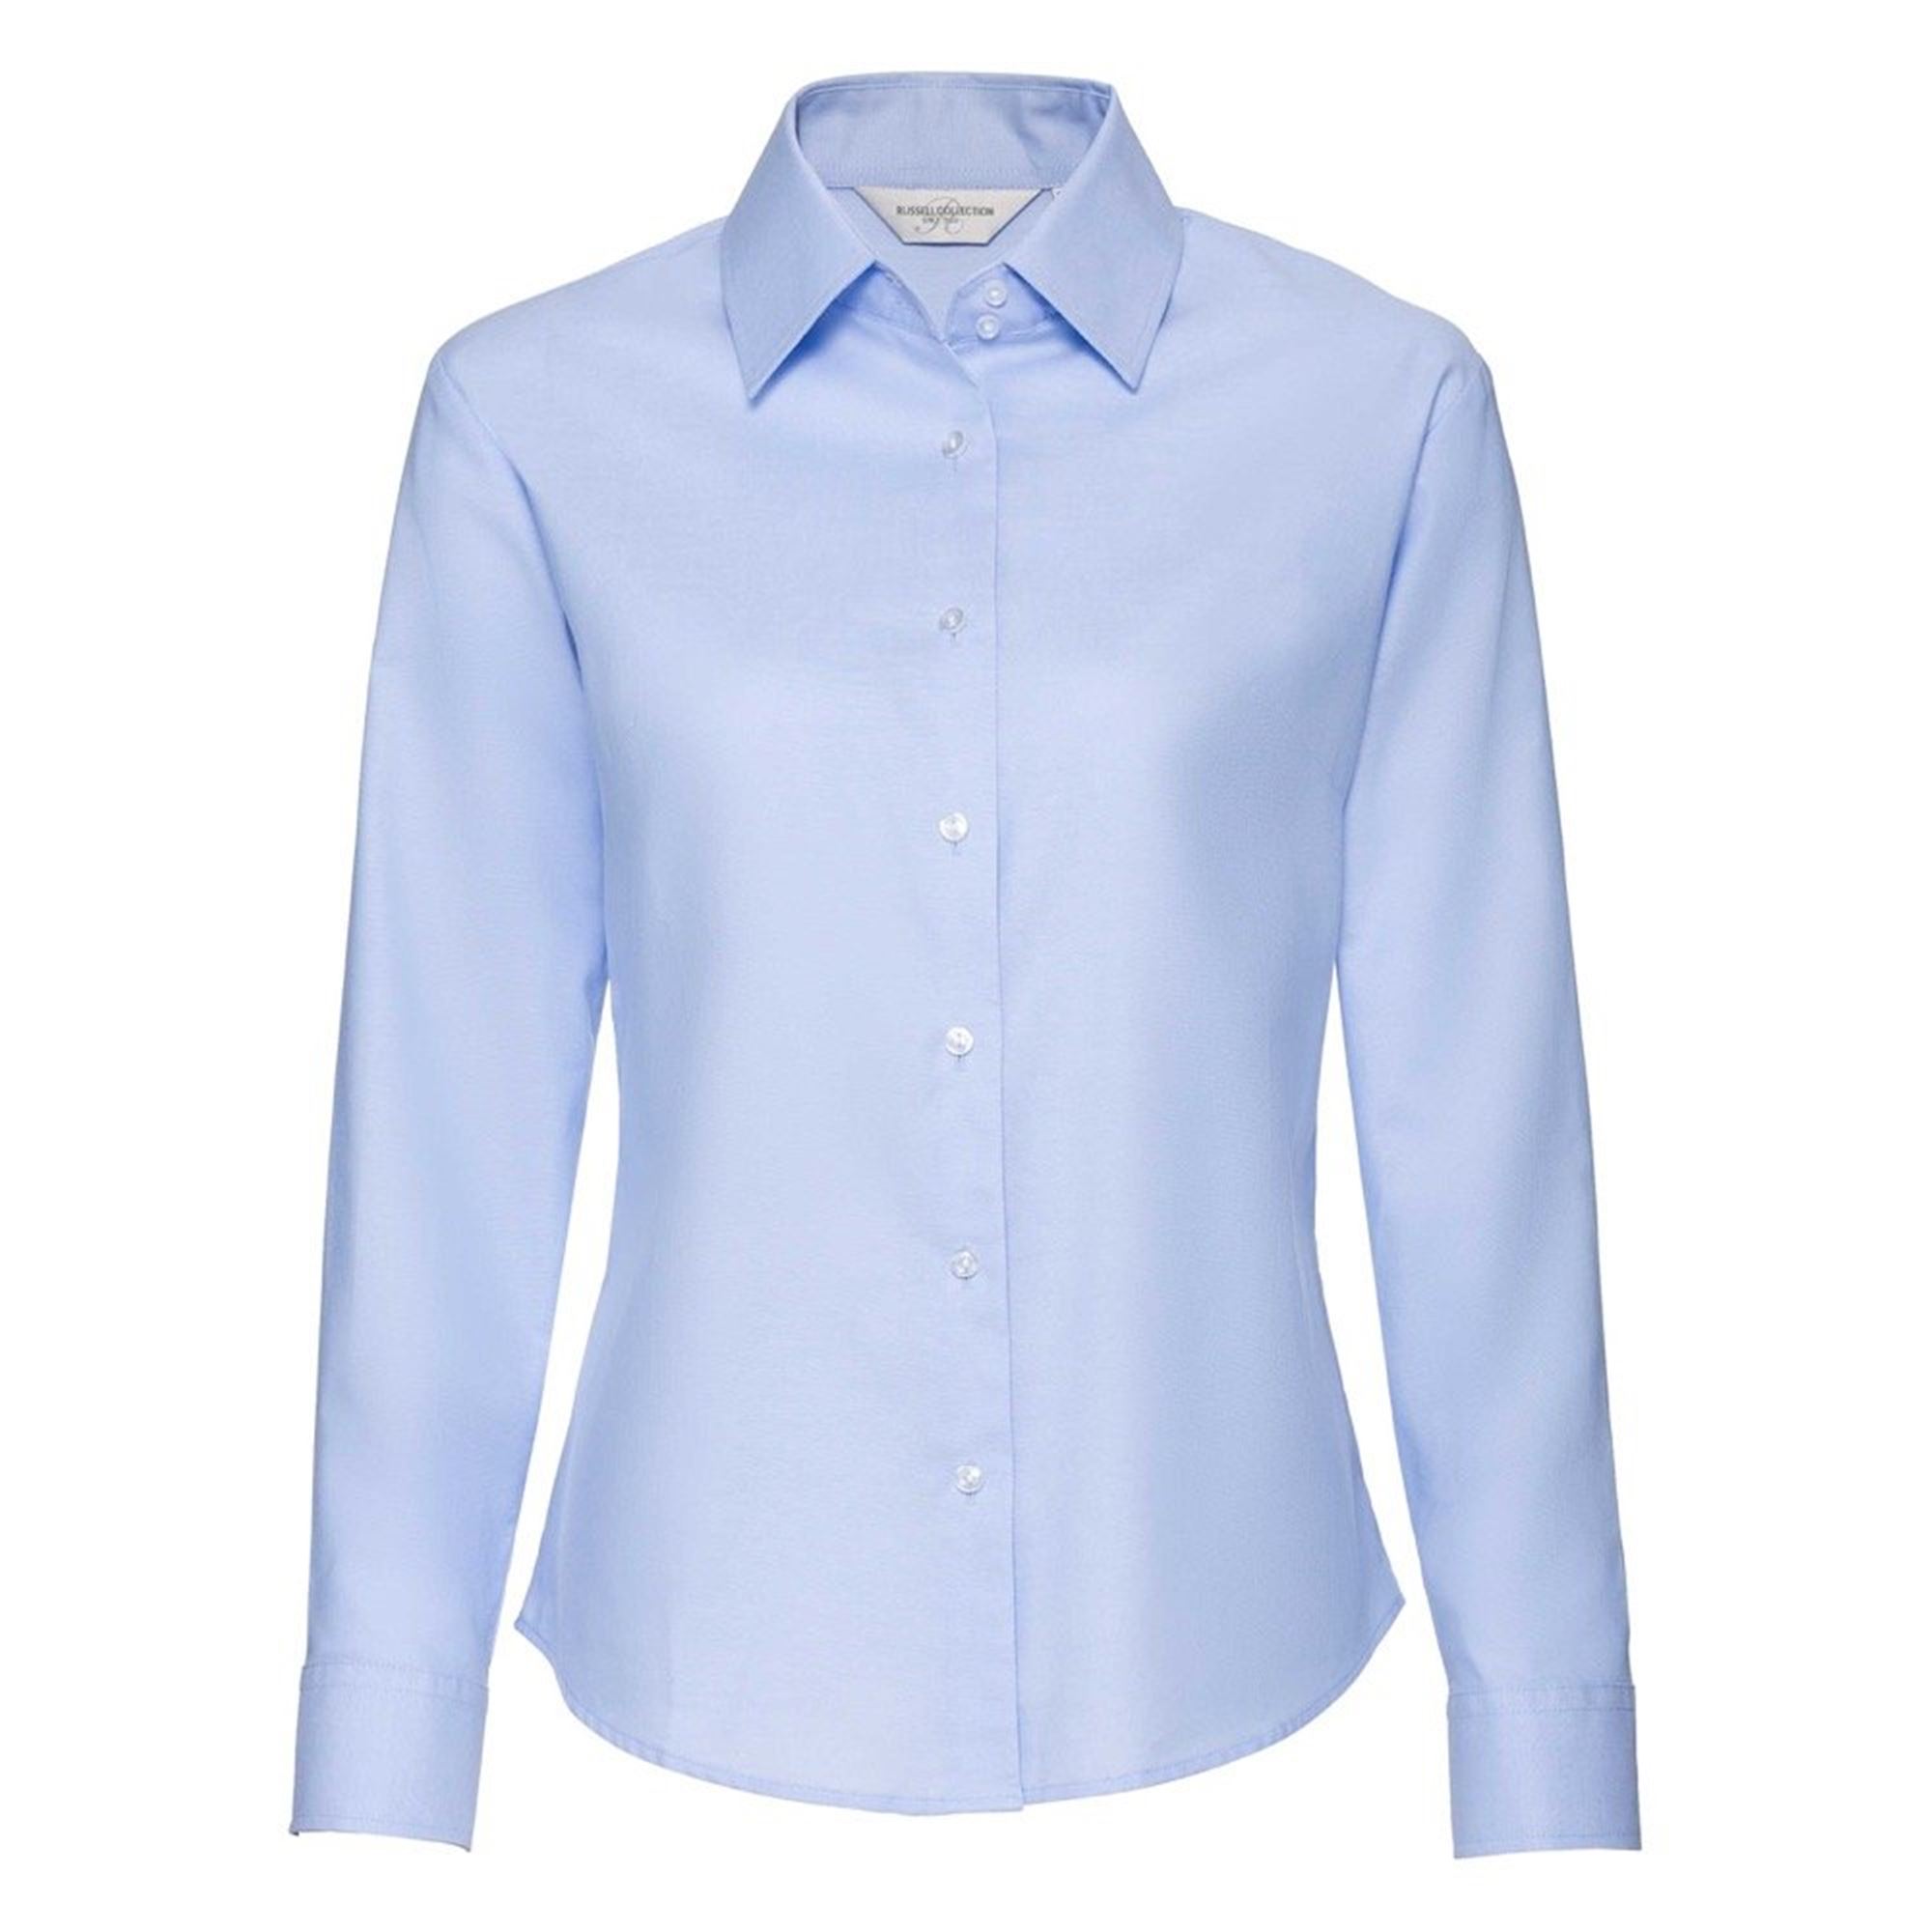 Russell 932F long sleeve Oxford blouse